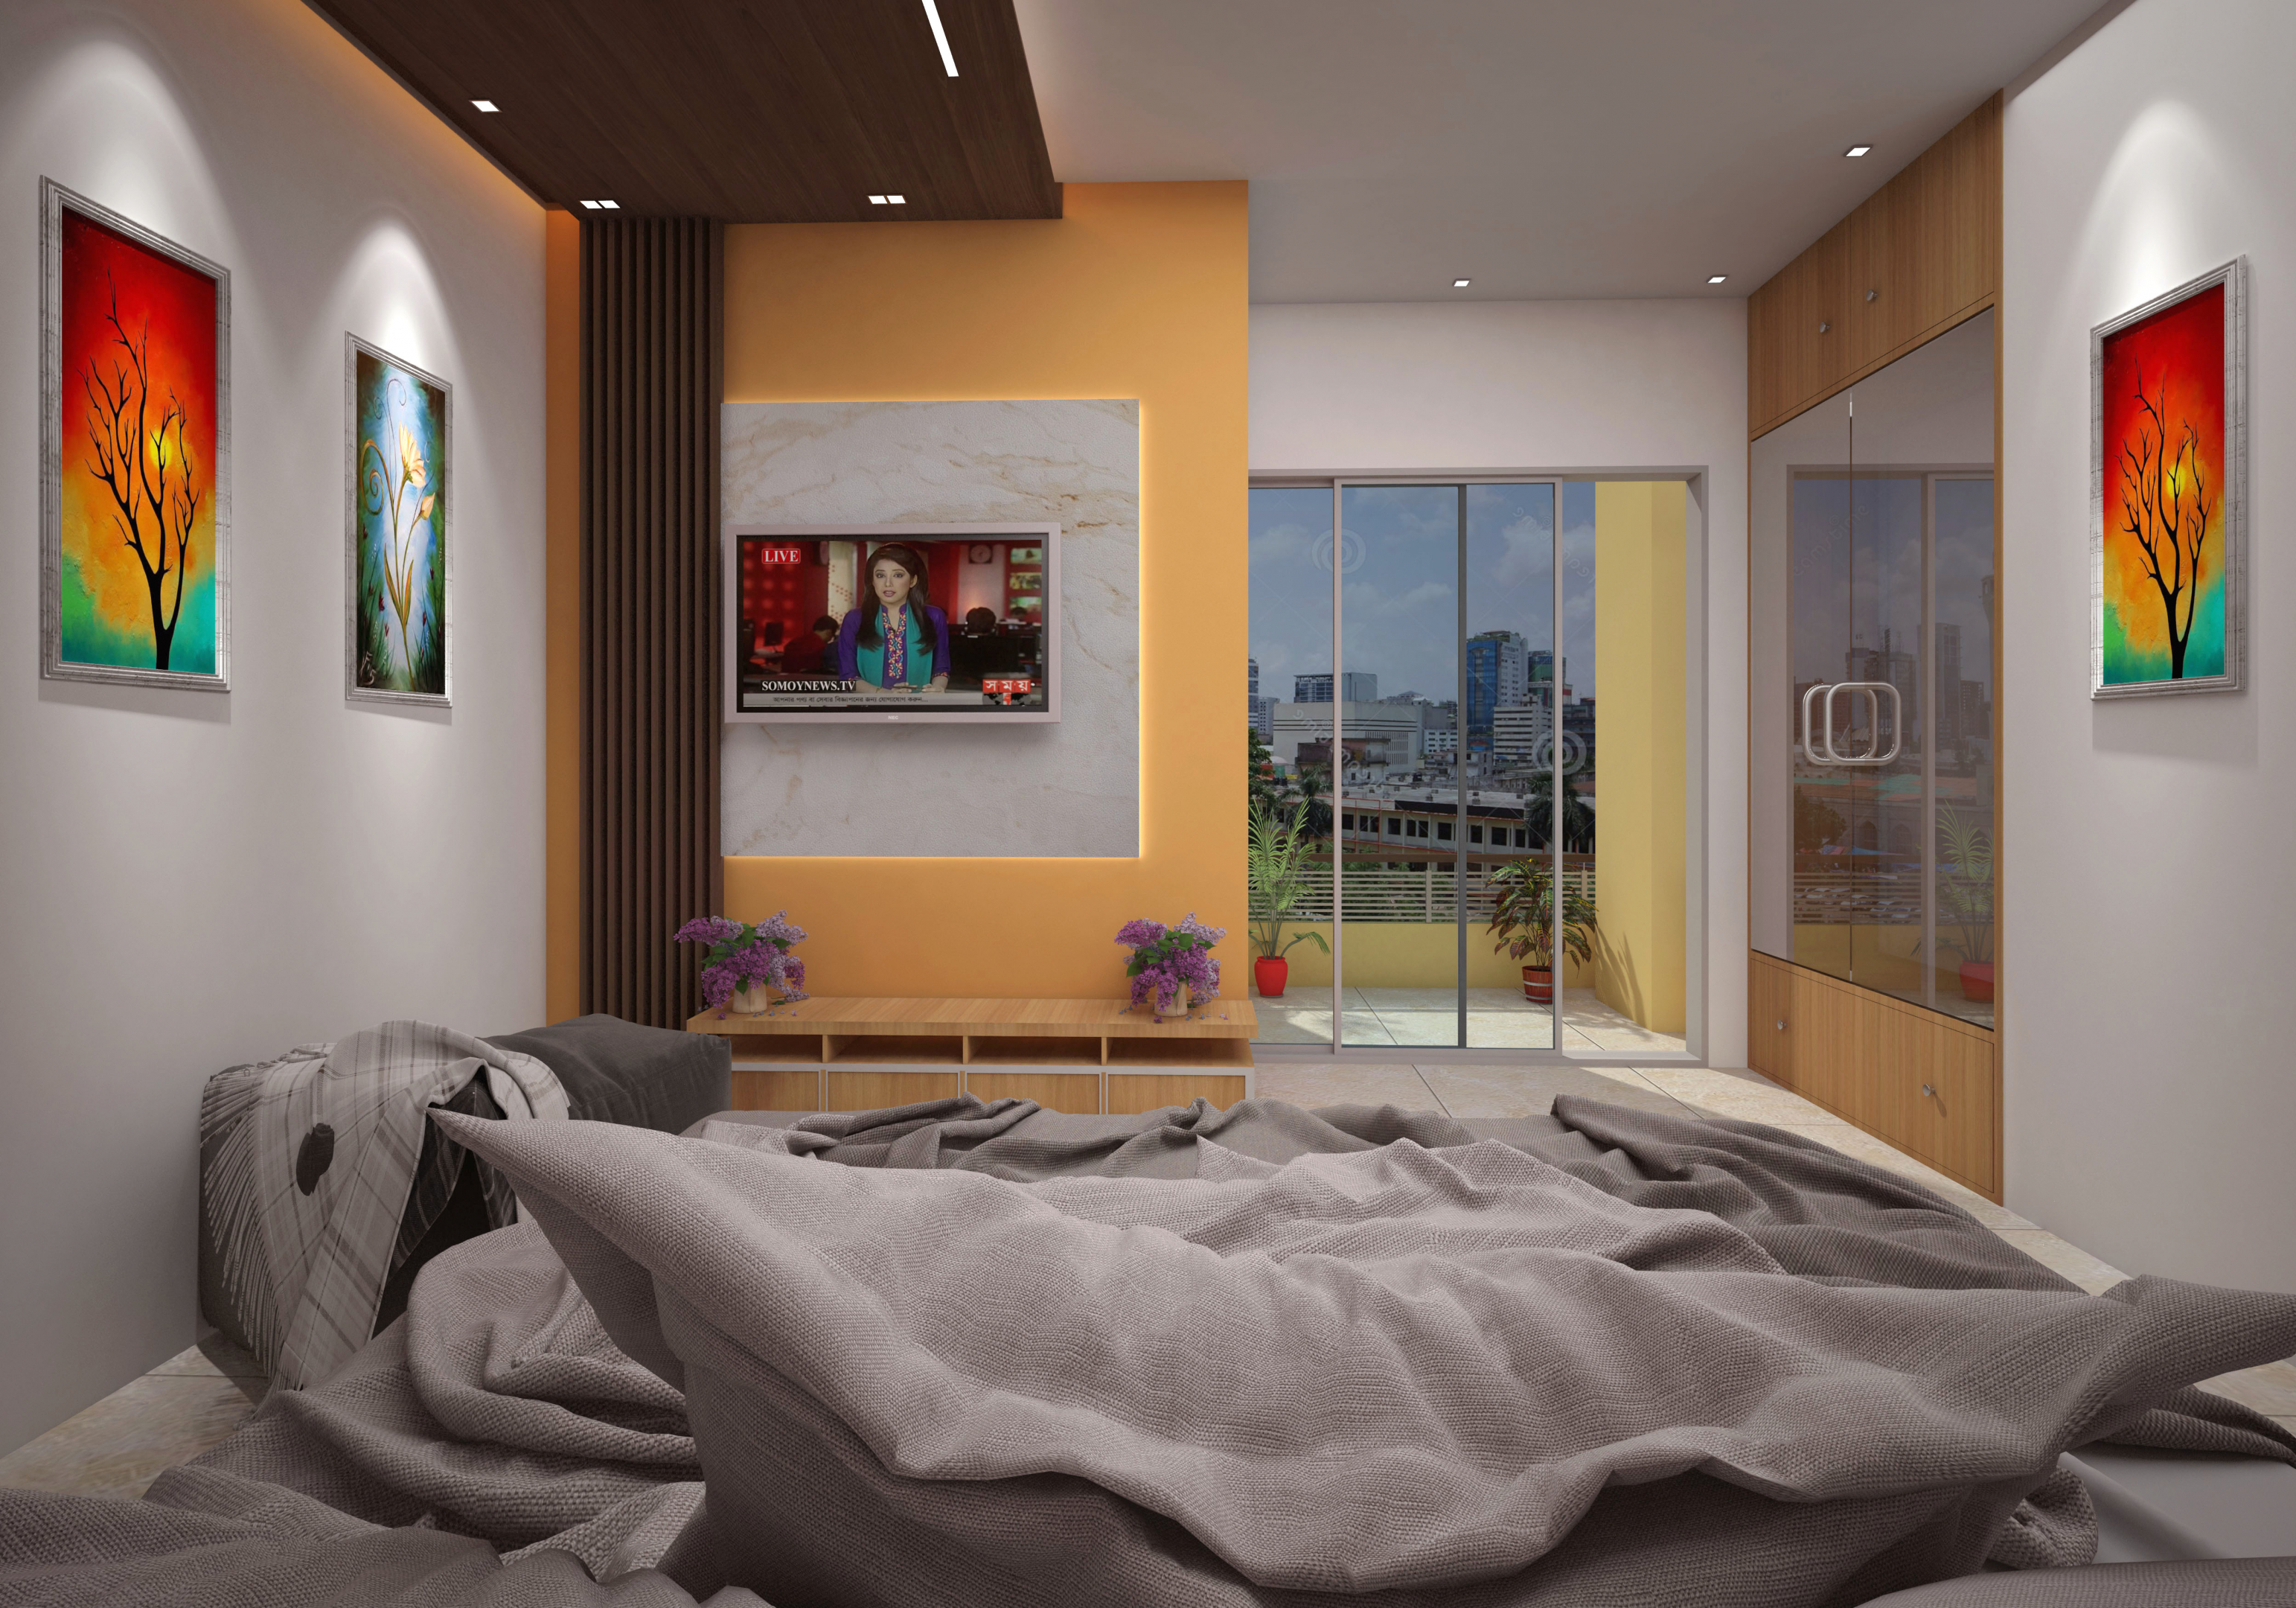 Bed room in 3d max vray 3.0 image